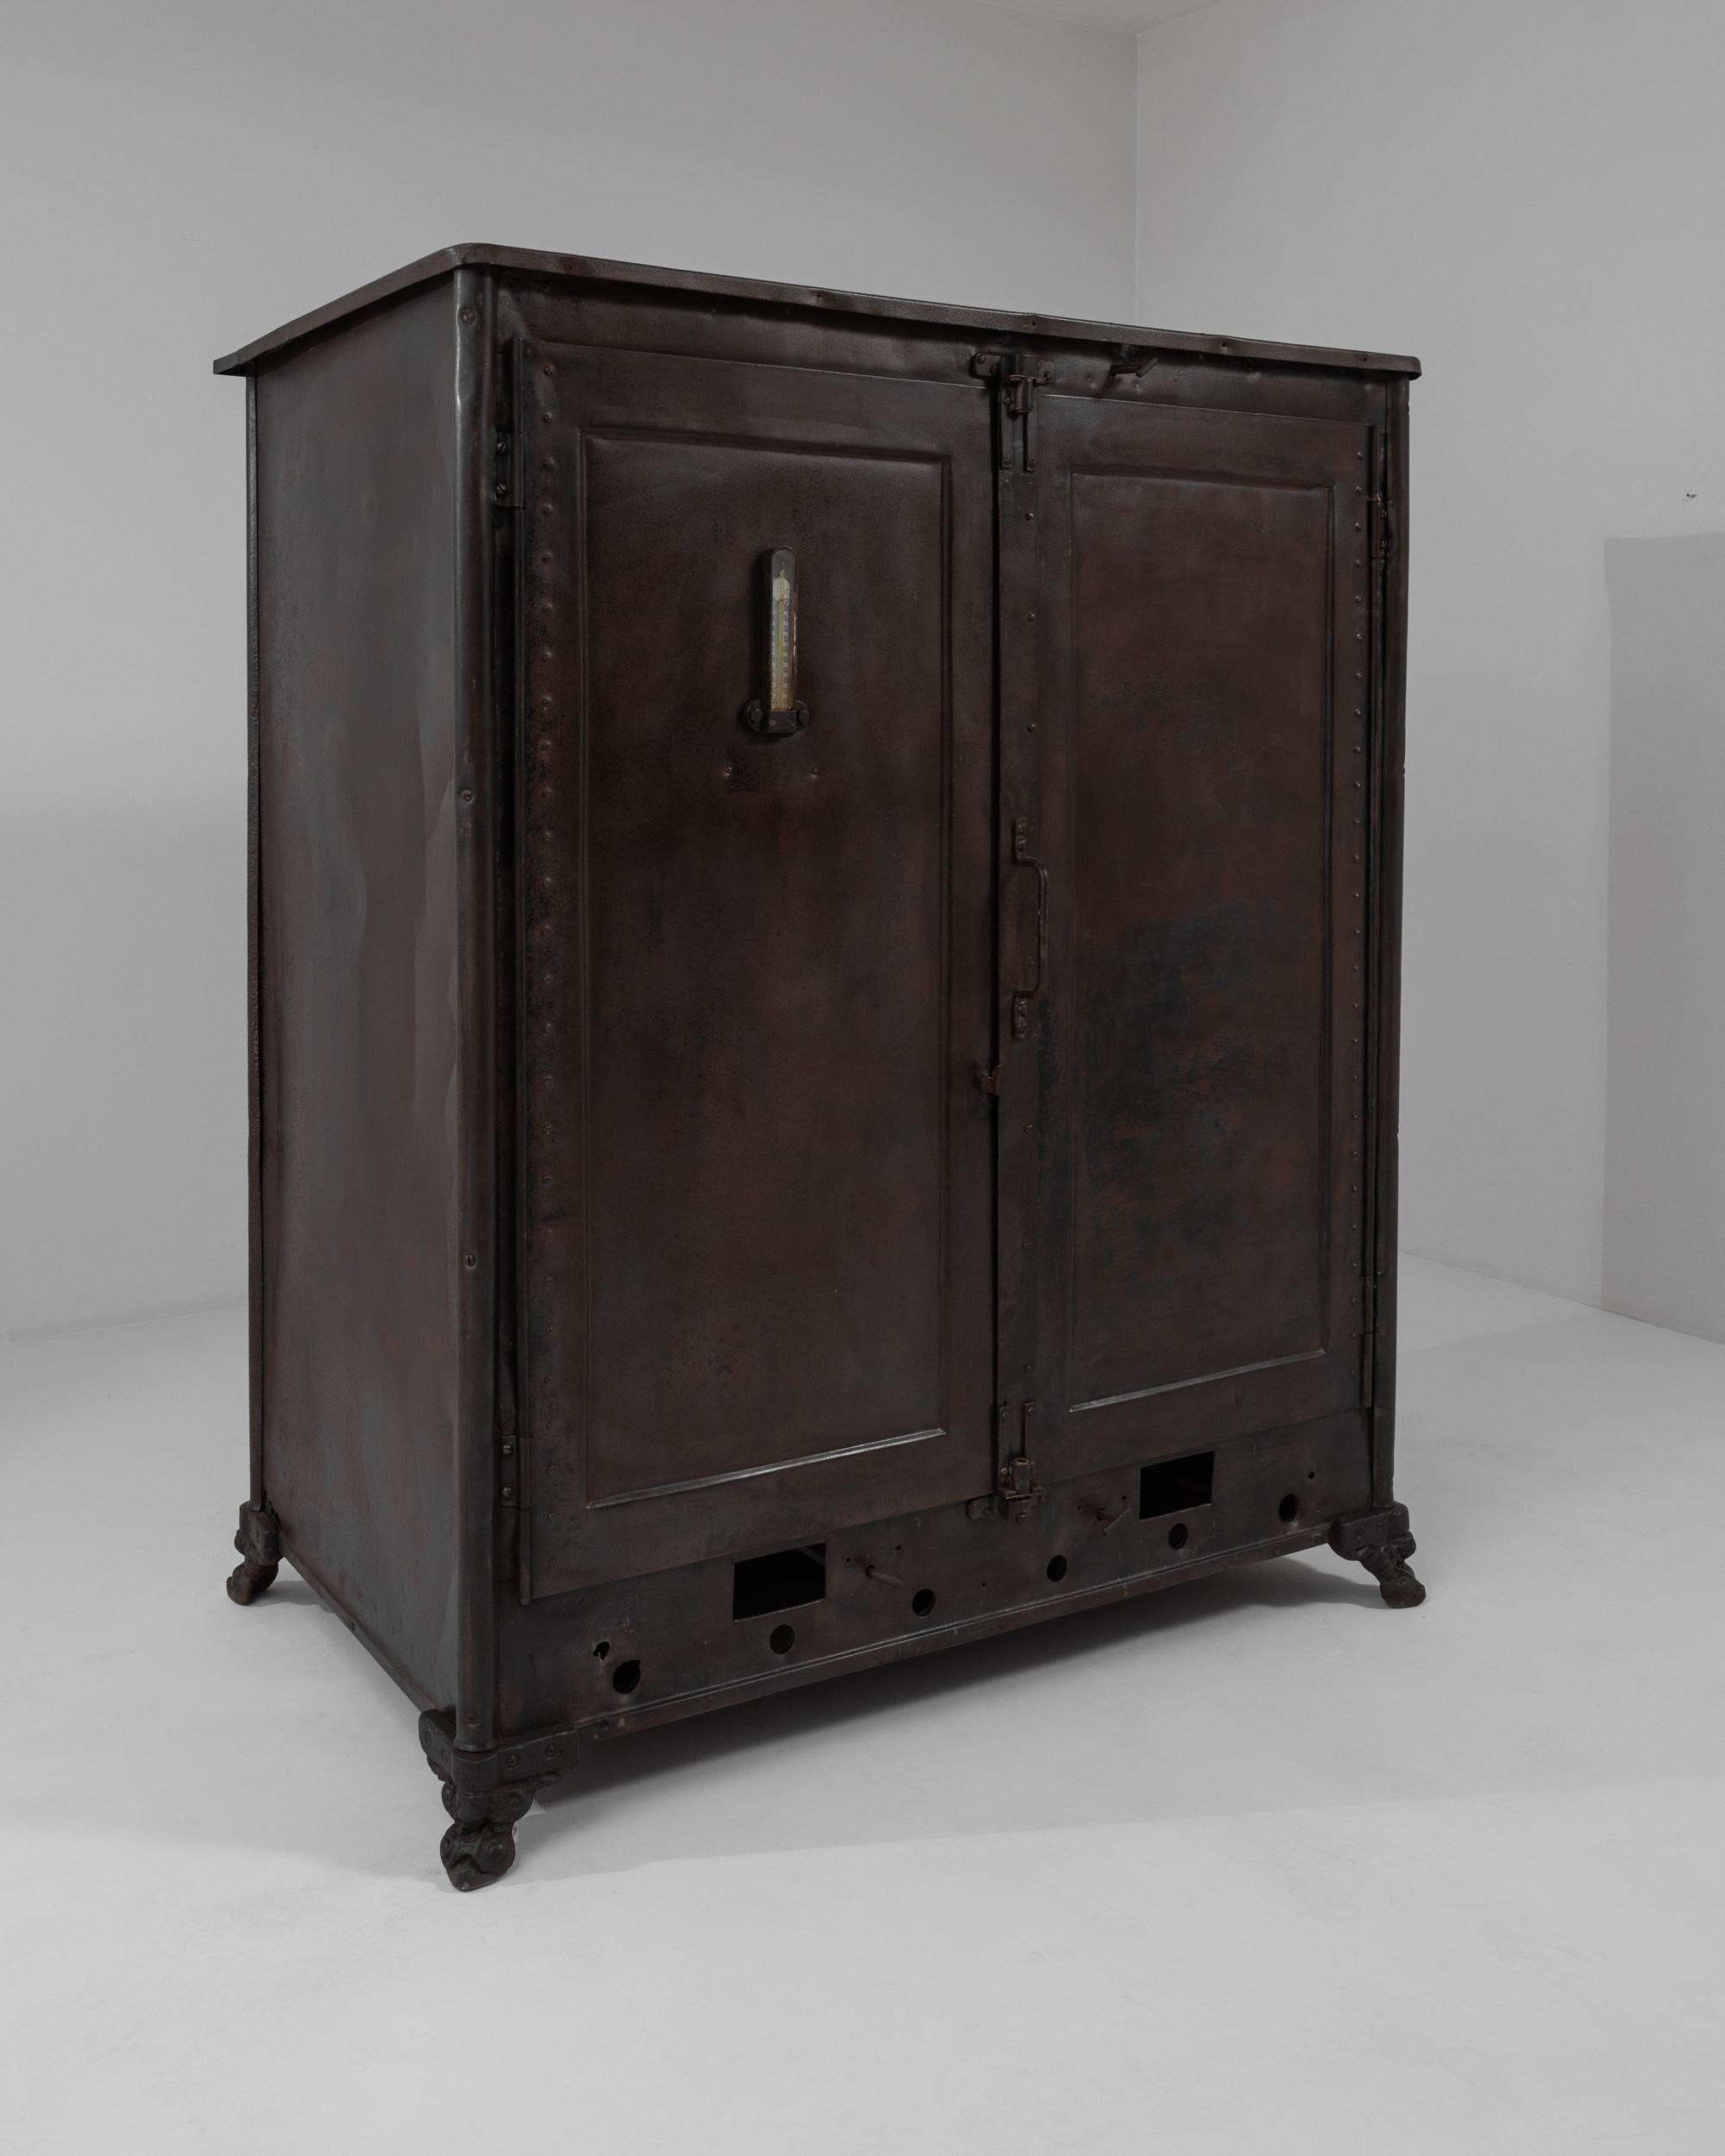 A metal cabinet made in Belgium circa 1900. The metal doors and sides of this sizable cabinet have ripened with age, a subtle glowing oxidized patina spreading across the curiously seasoned material. The doors are equipped with insulated paneling,